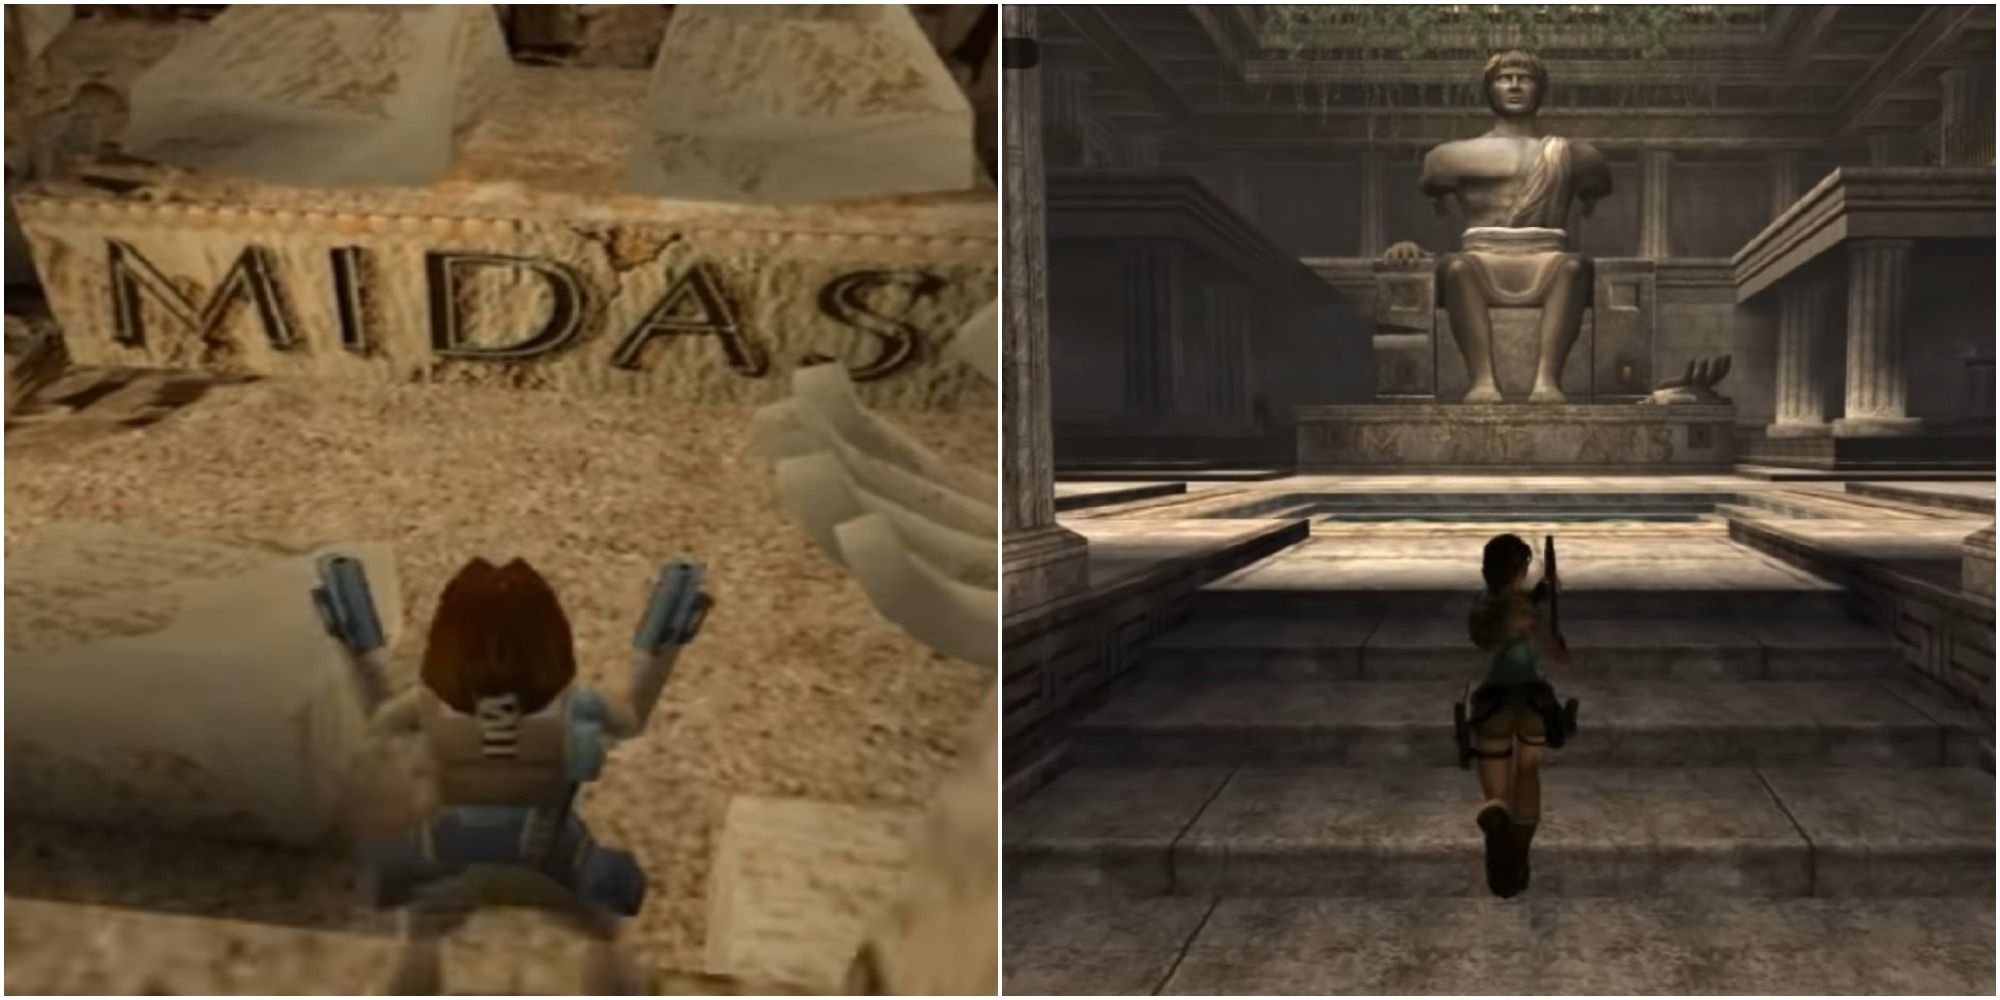 The vast changes of Palace Midas in Tomb Raider 1996 and Tomb Raider Anniversary